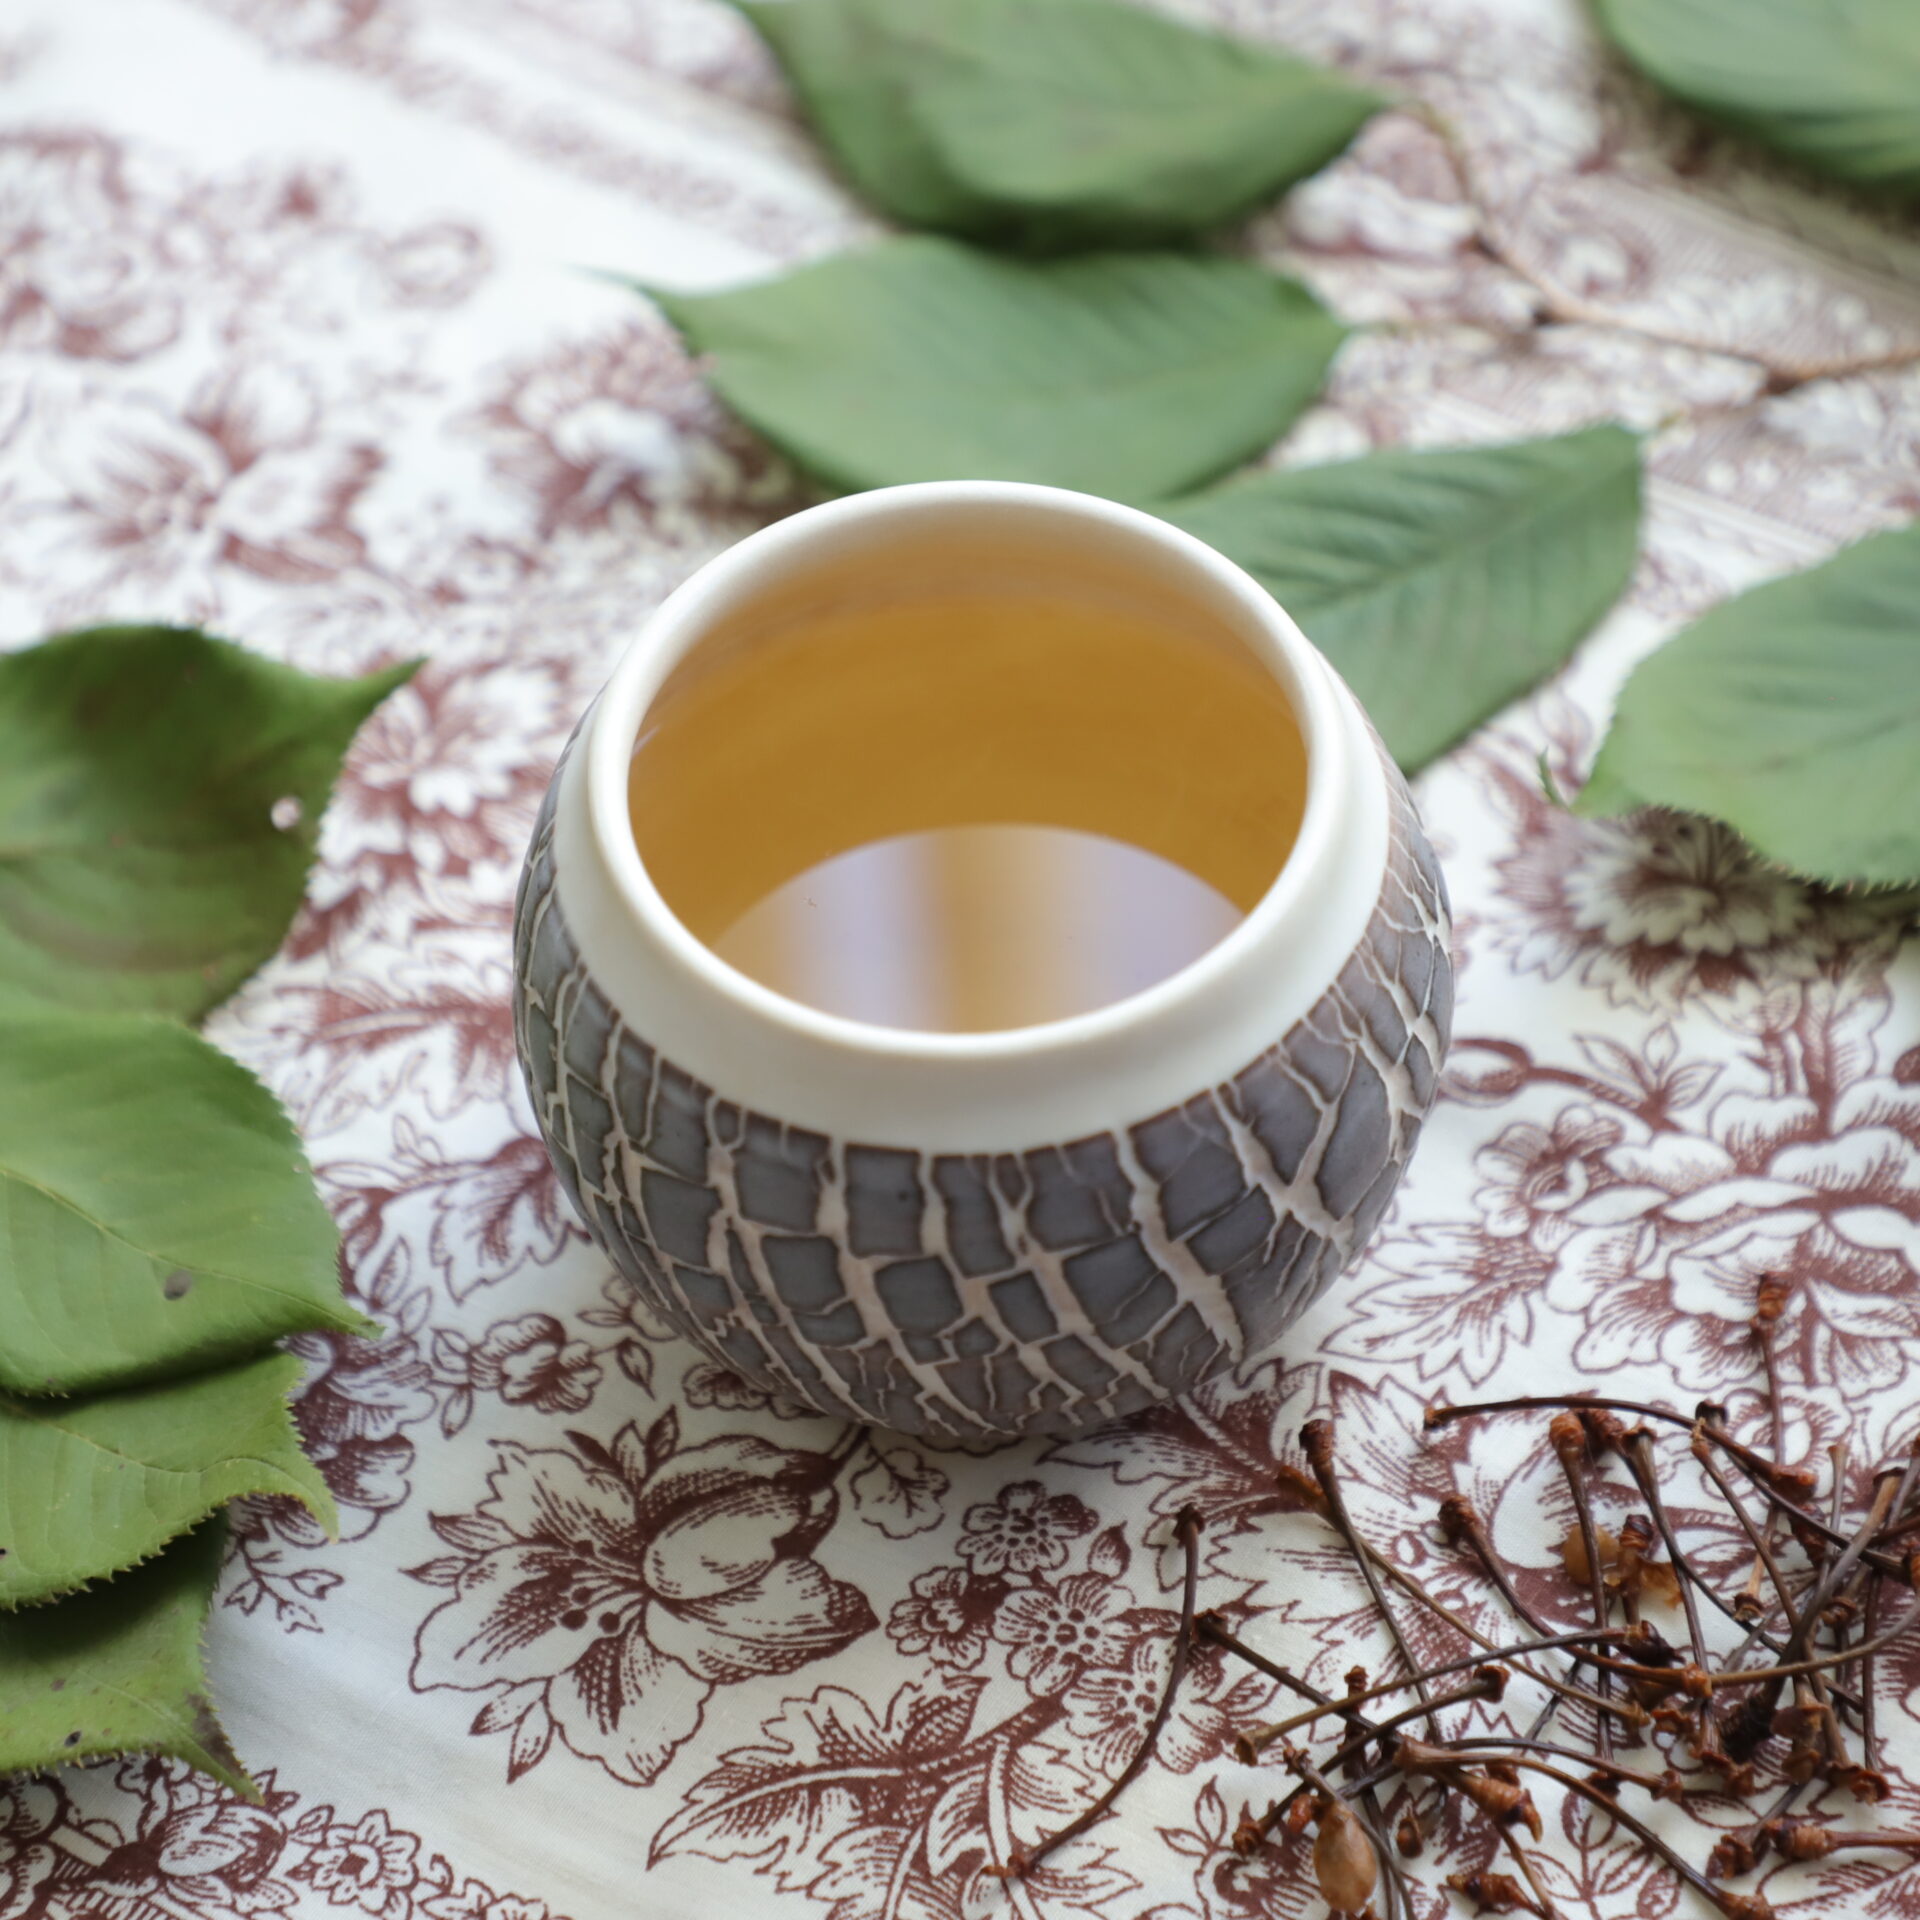 Spherical ceramic cup with white rim and purple crackled effect holding amber liquid next to cherry stems and cherry leaves on a brown flowered tablecloth.